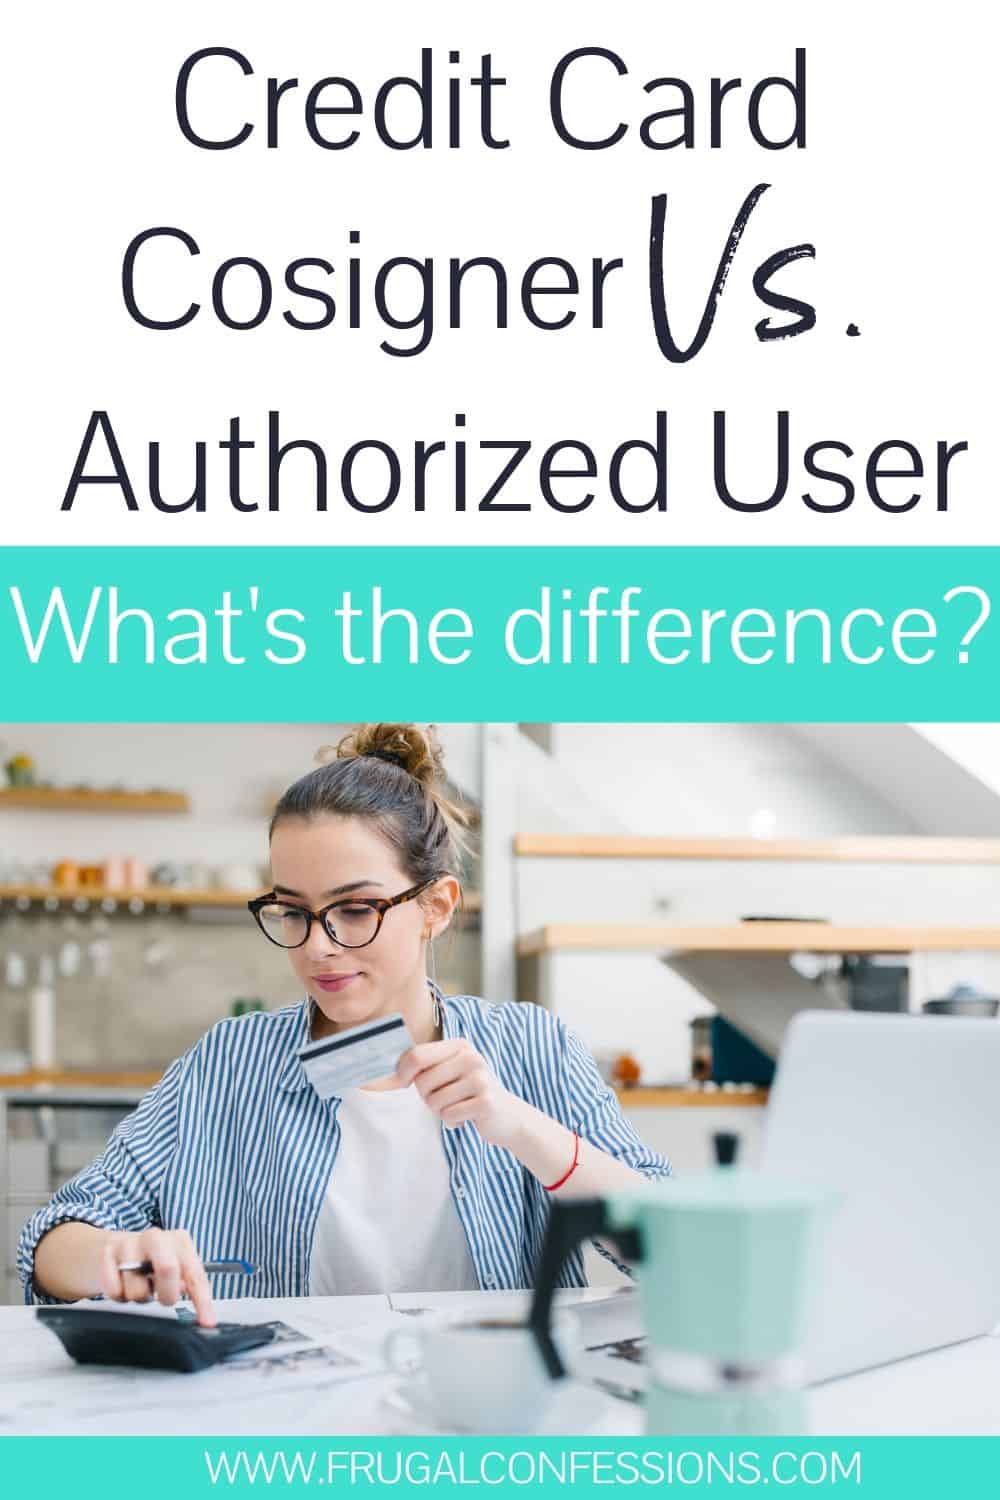 young woman using calculator, text overlay "credit card cosigner vs authorized user: what's the difference?"